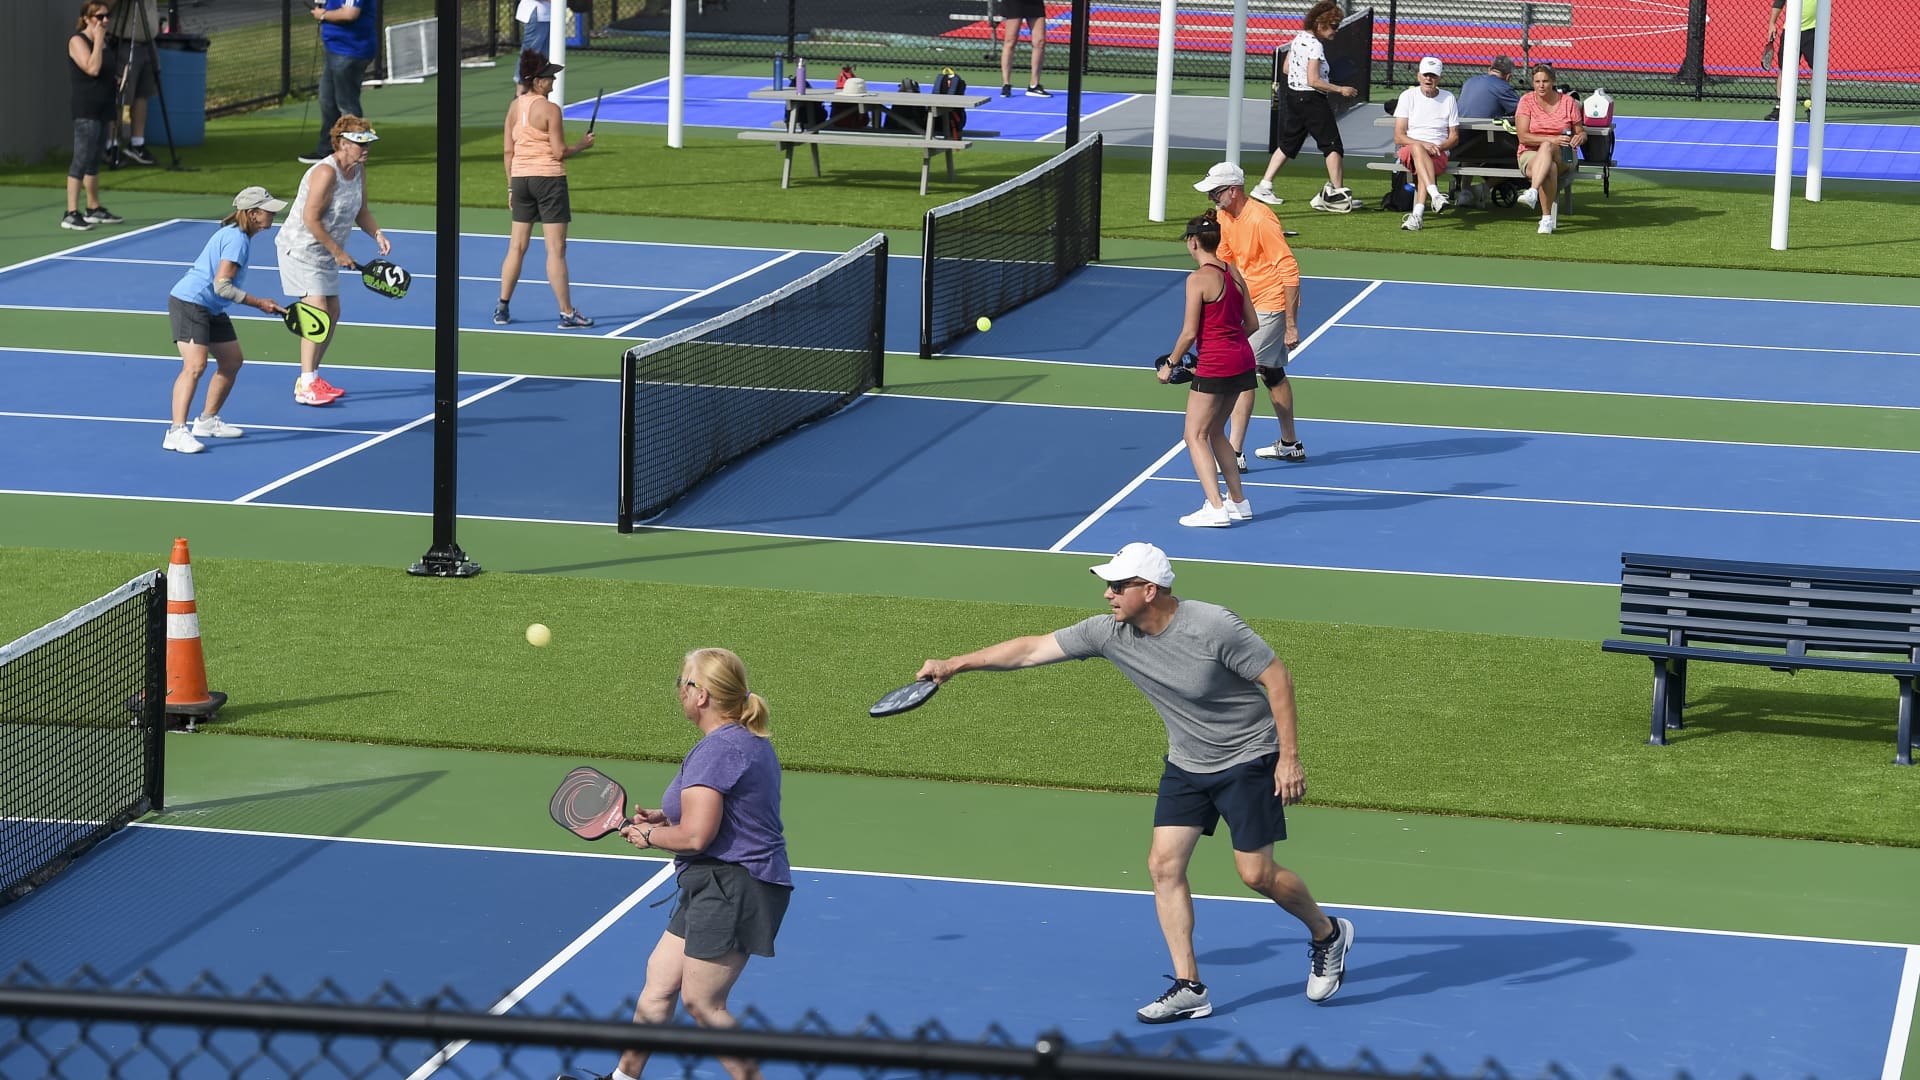 Pickleball translates into big business with tournaments, investments